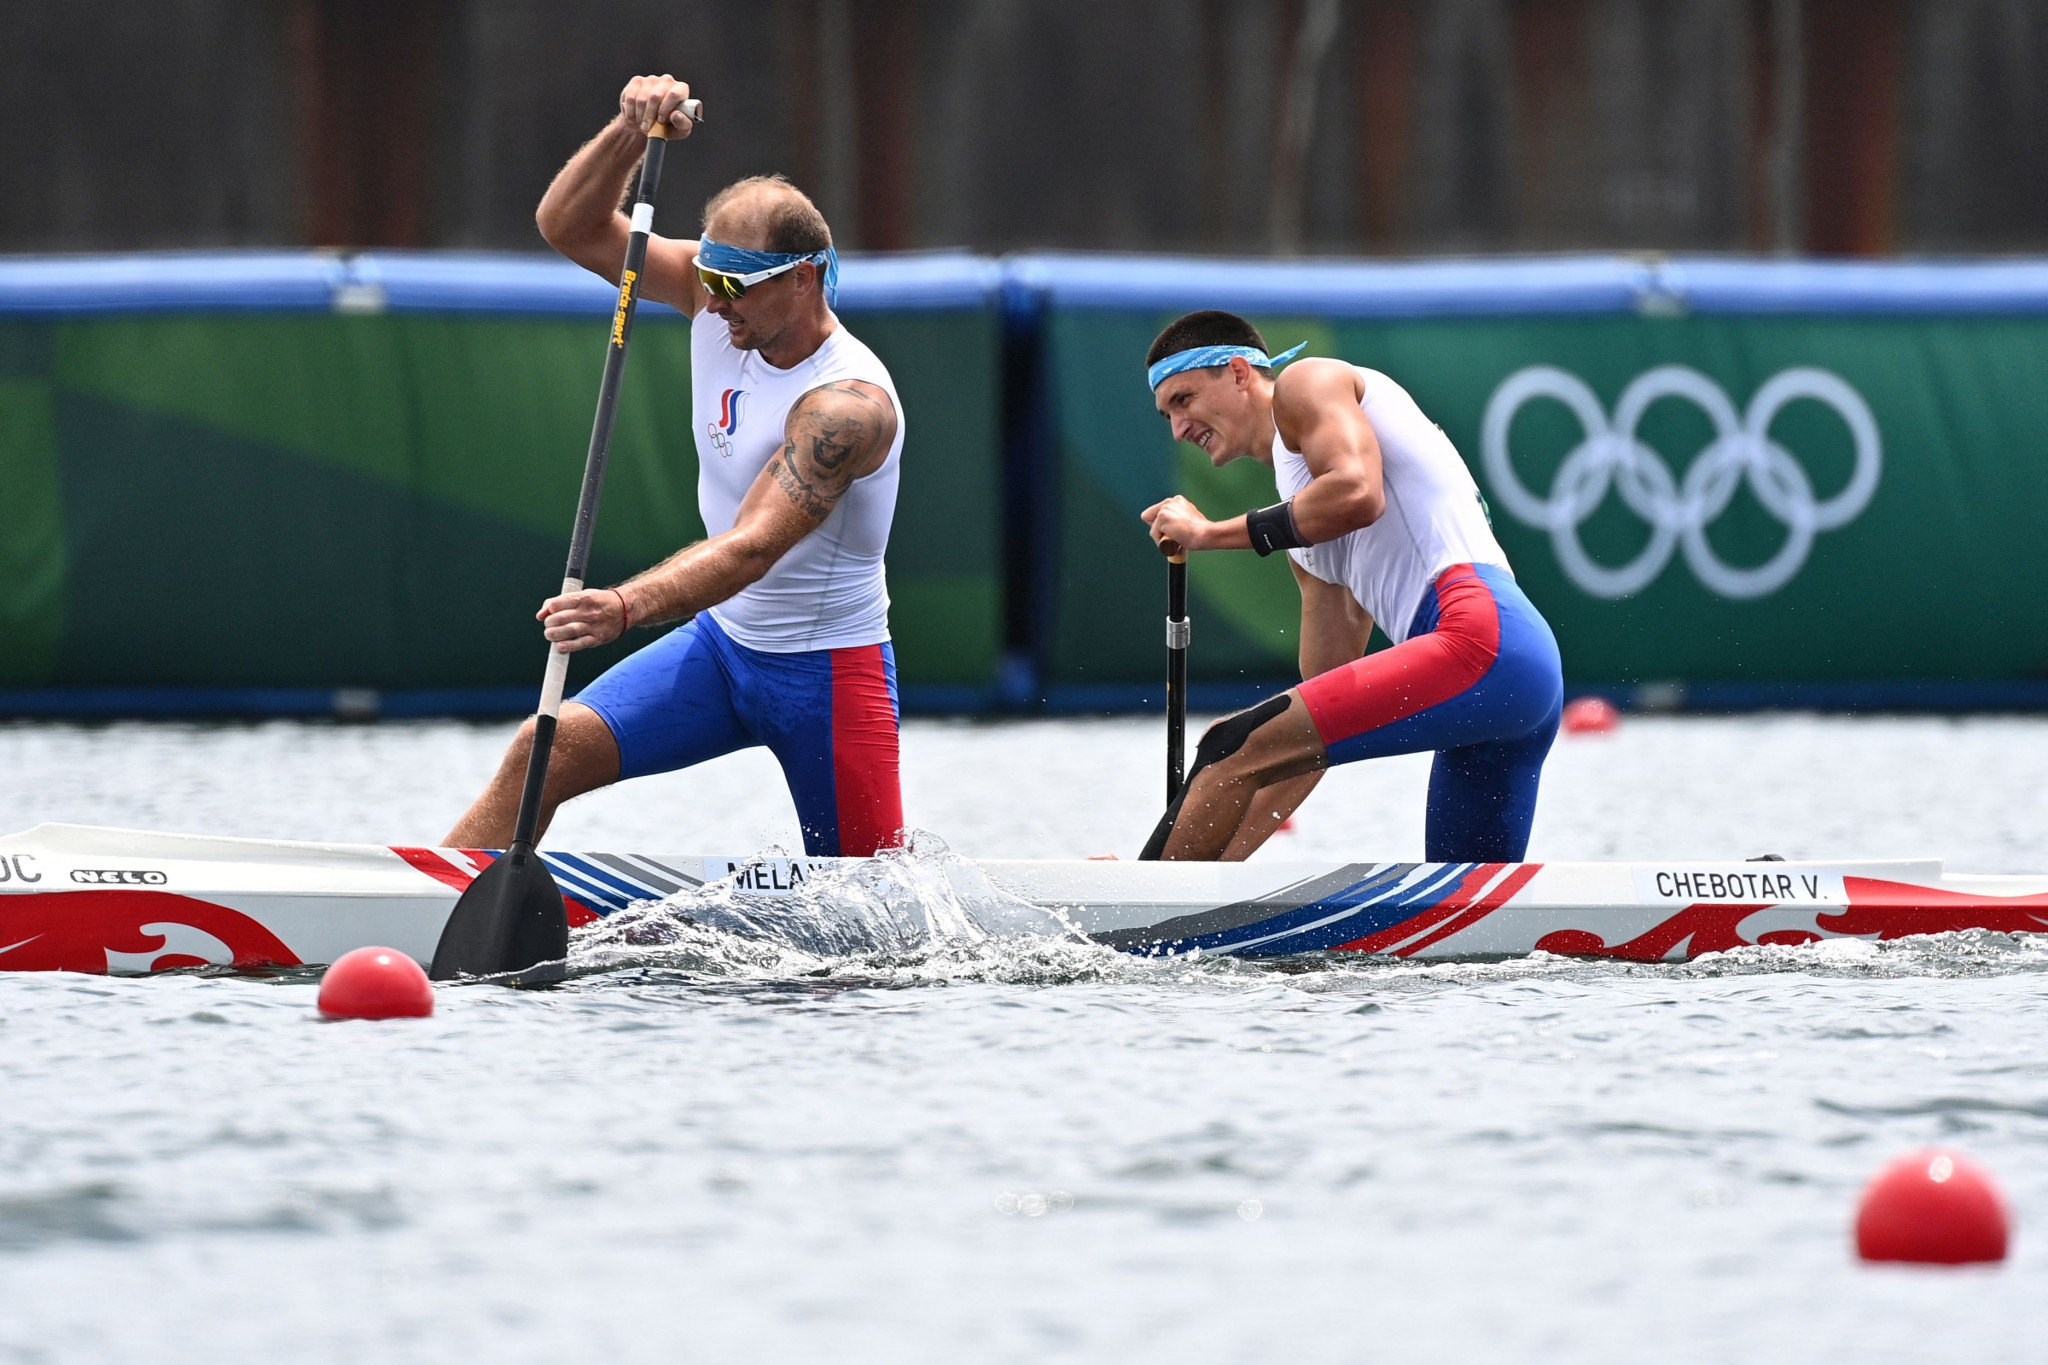 Athletes could secure quotas for Paris 2024 at the European canoe sprint qualifier, due to be hosted by Hungary in May next year ©Getty Images